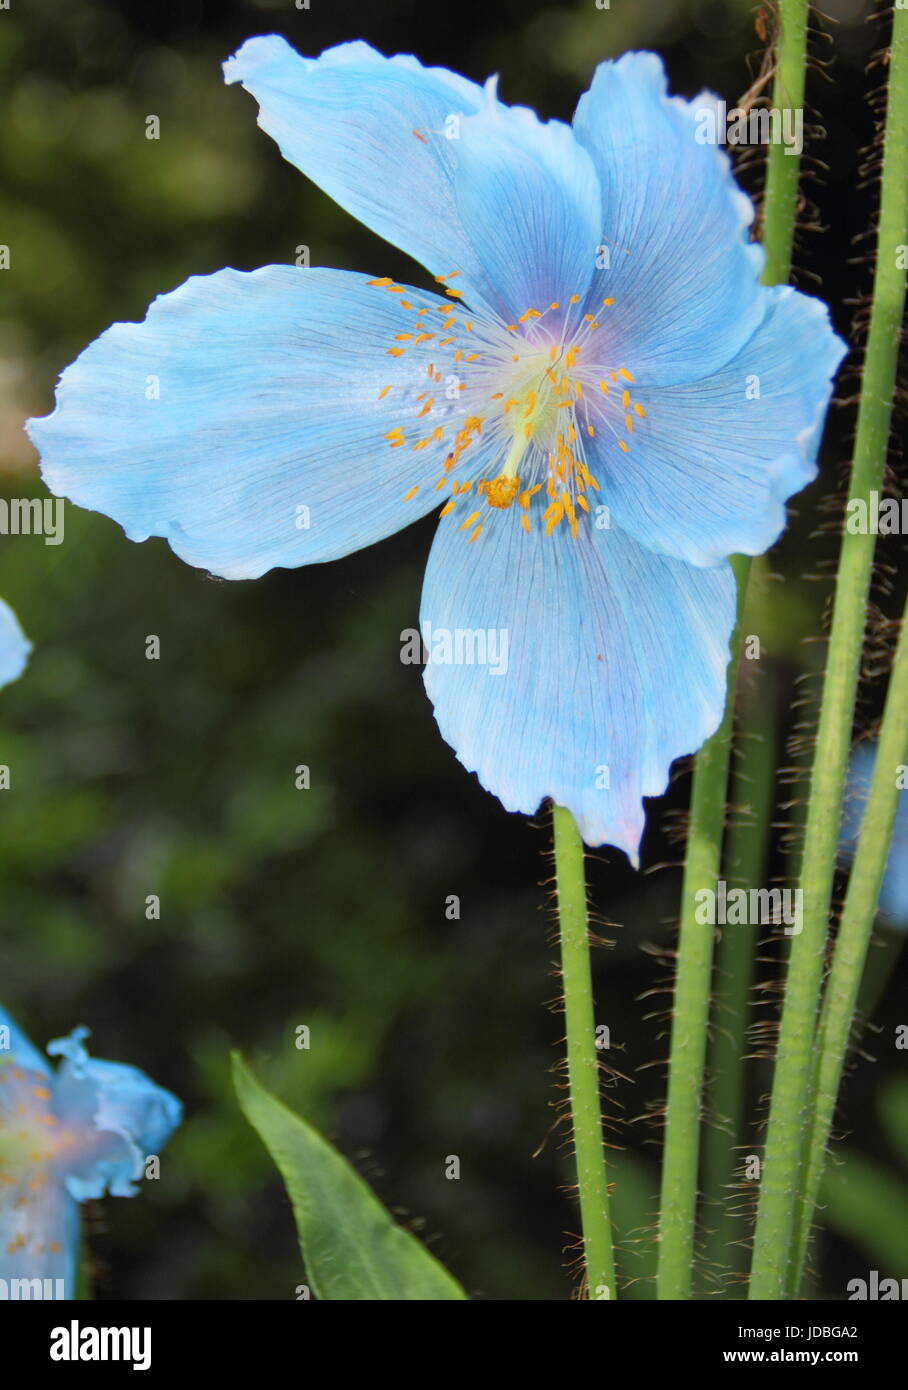 Himalayan Blue Poppy (Meconopsis 'Lingholm' variety), flowering in a shady spot in an English garden in June, UK Stock Photo